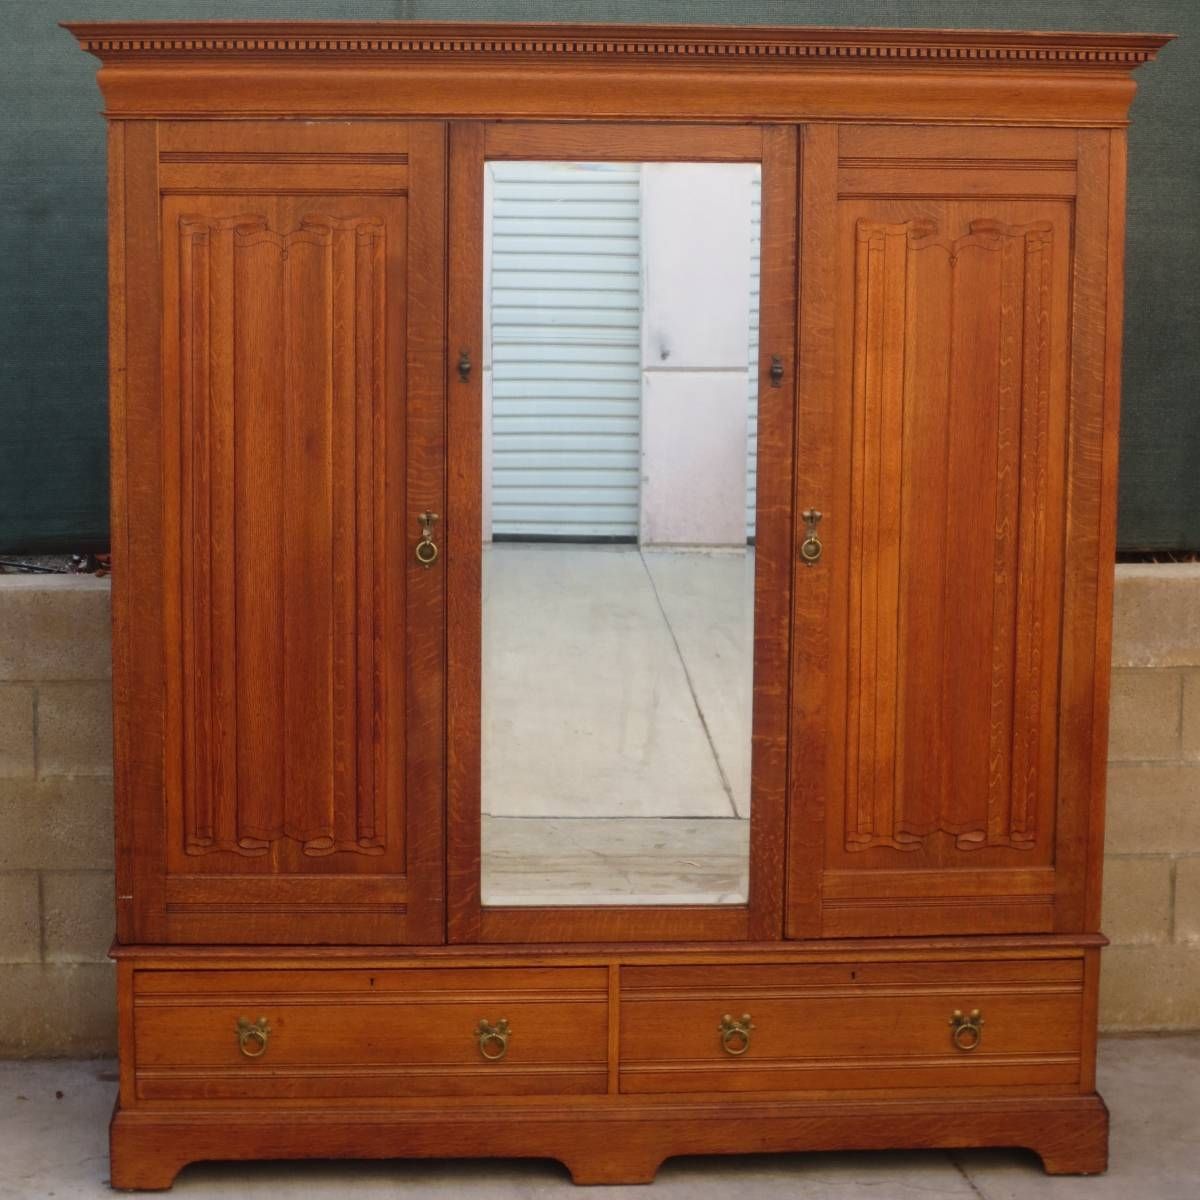 Antique Armoires, Antique Wardrobes, And Antique Furniture From For Antique Wardrobes (View 2 of 15)